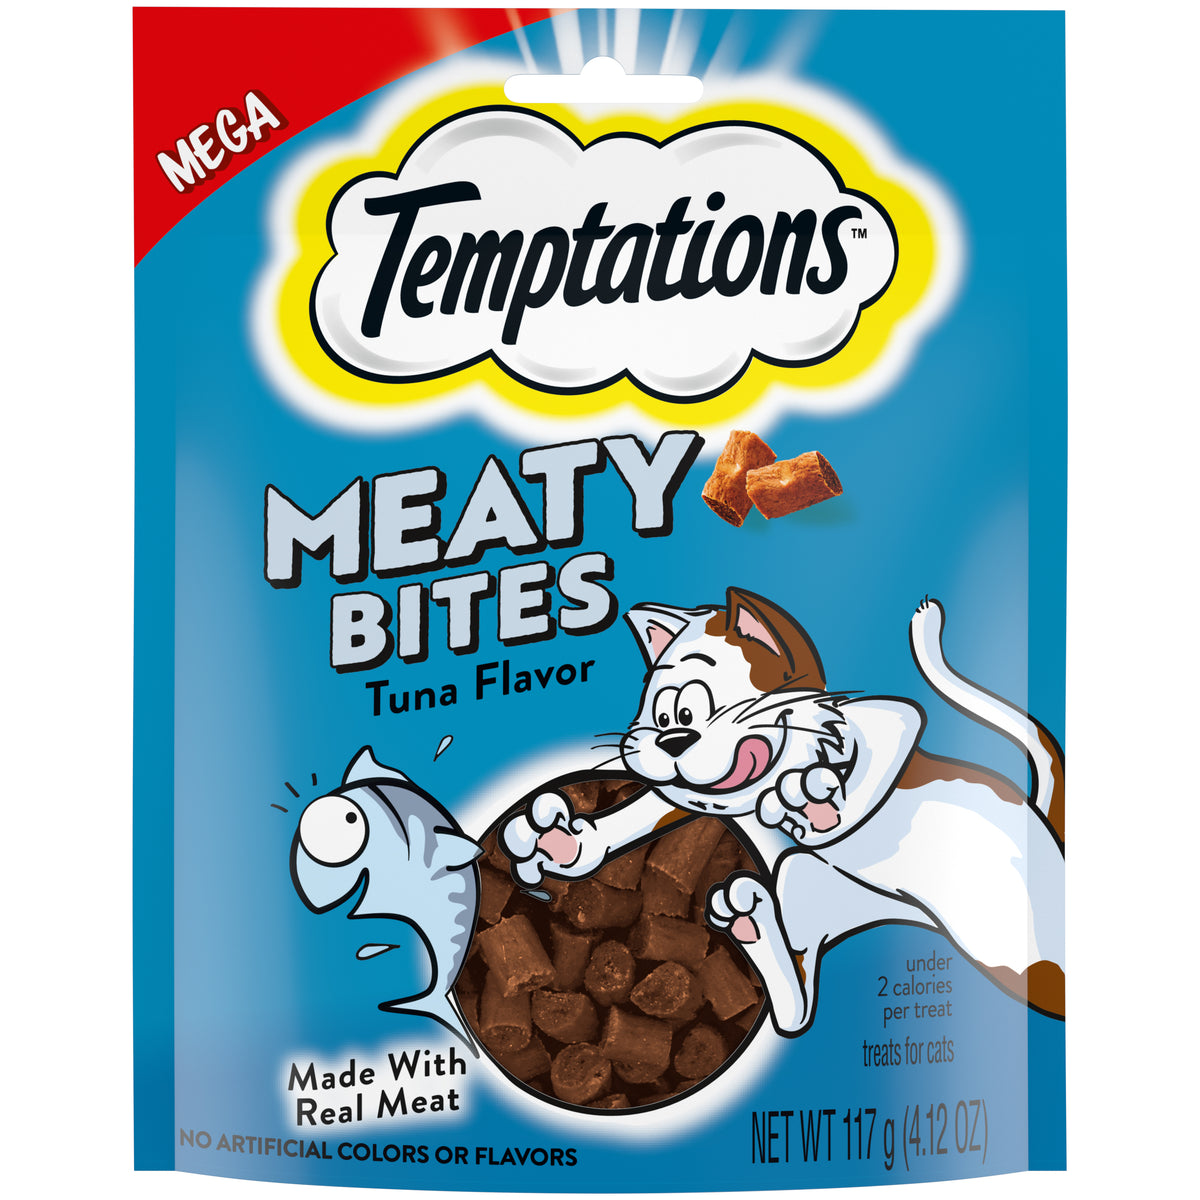 [Temptations][TEMPTATIONS Meaty Bites, Soft and Savory Cat Treats, Tuna Flavor, 4.1 oz. Pouch][Main Image (Front)]